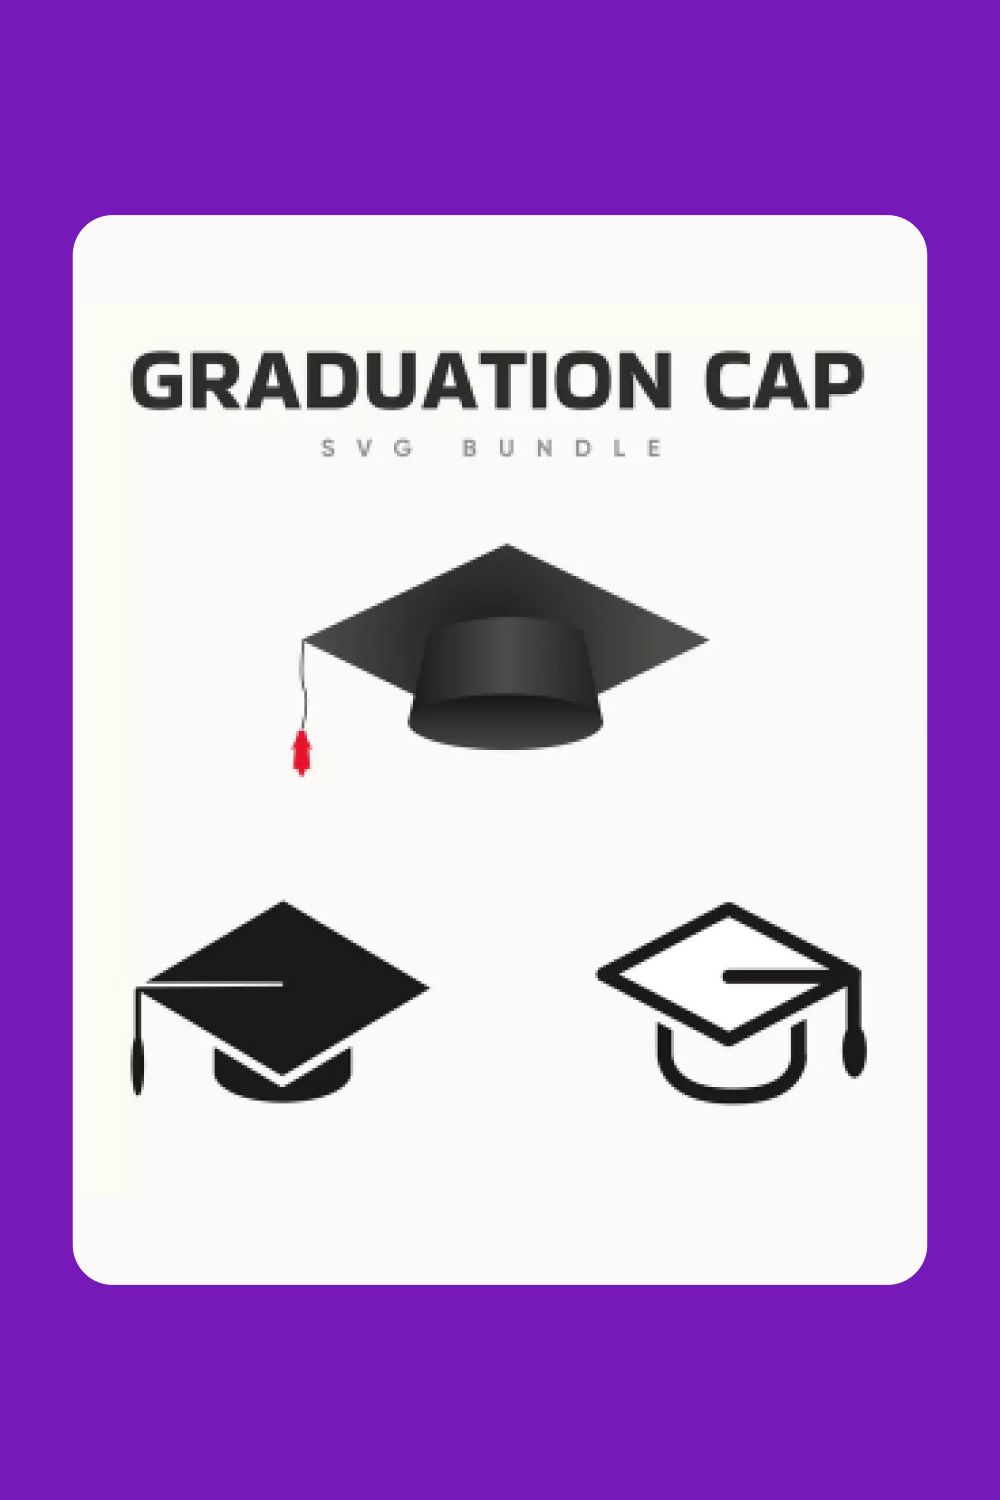 Collage of Graduation Cap images in drawn and vector style.